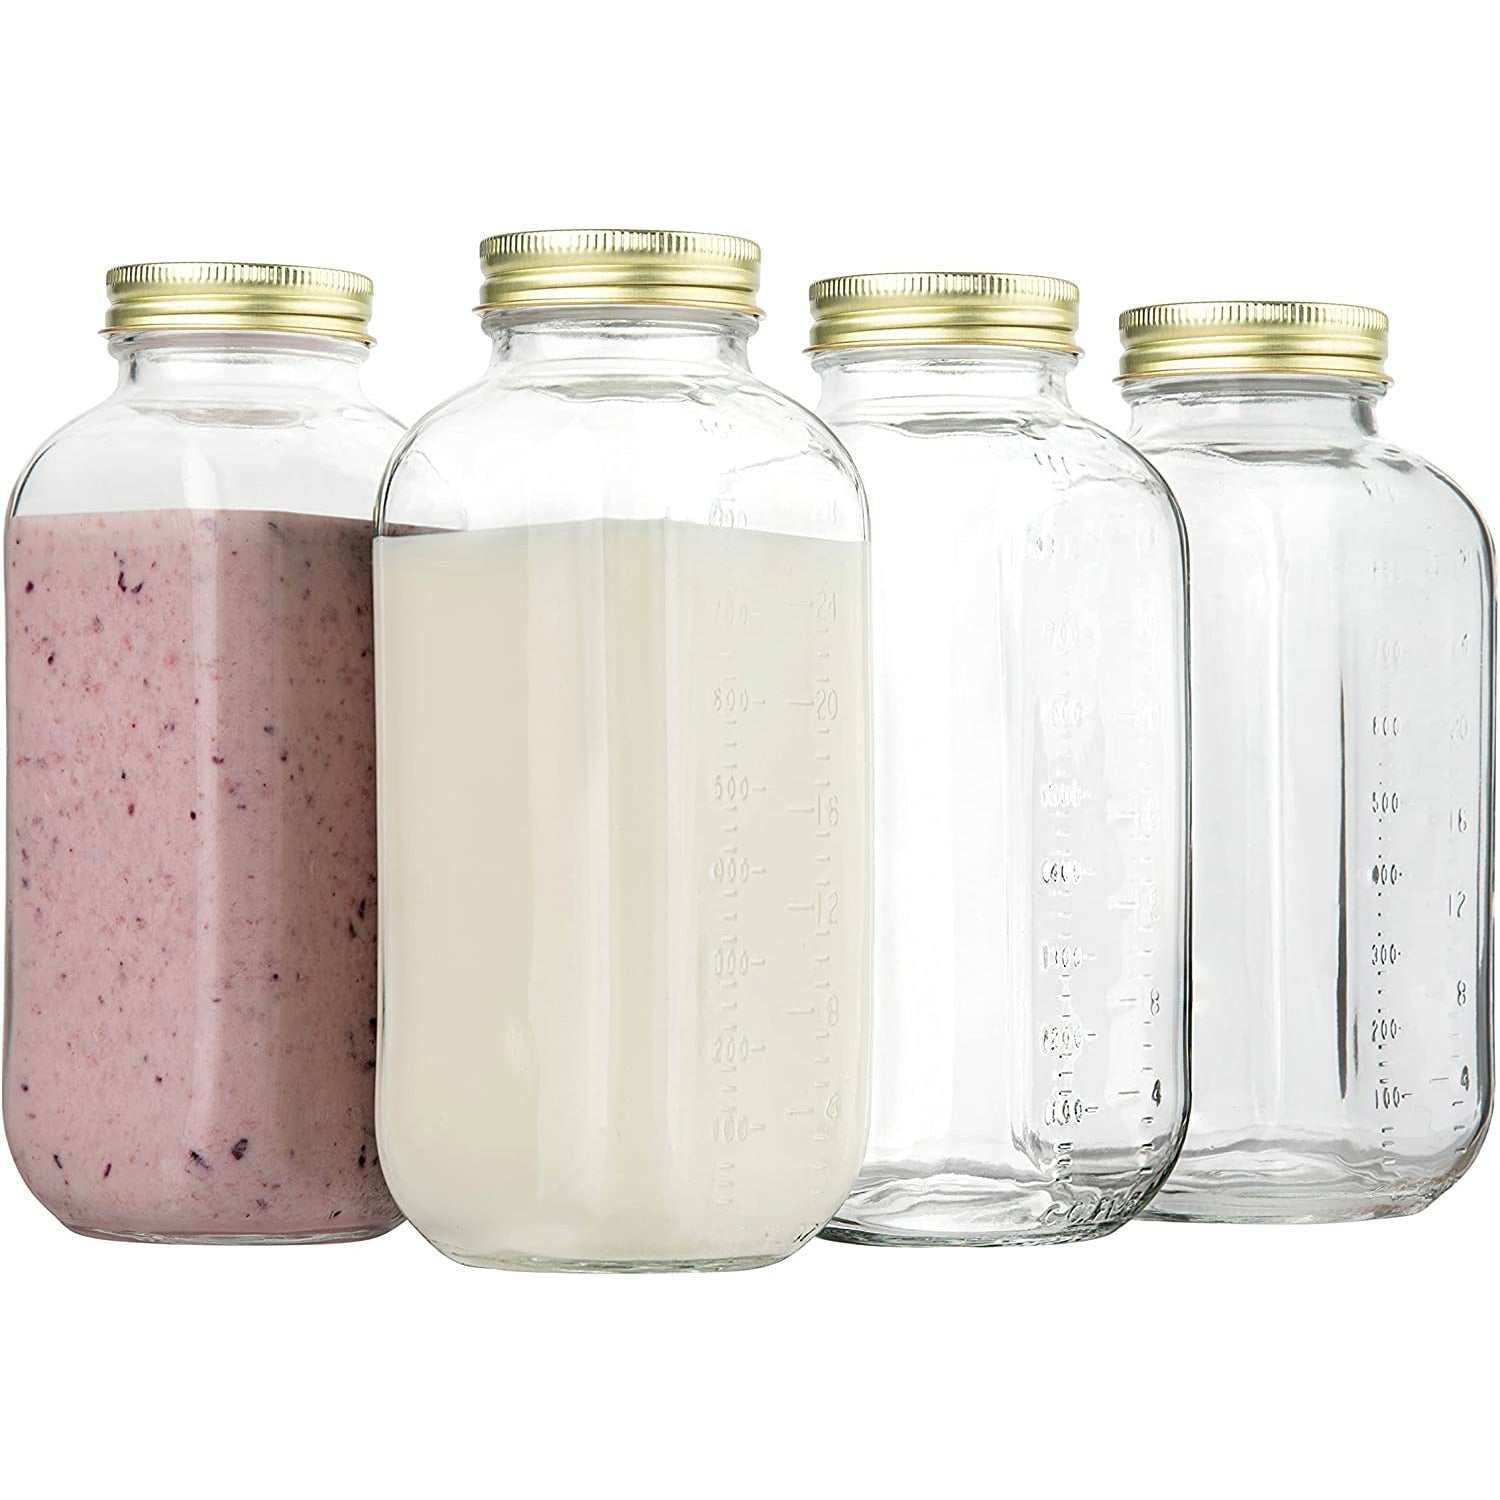 Kitchentoolz 32 oz Round Glass Milk Bottle Carafe with Lids & Pour Spout  Made in USA 2 Pack 